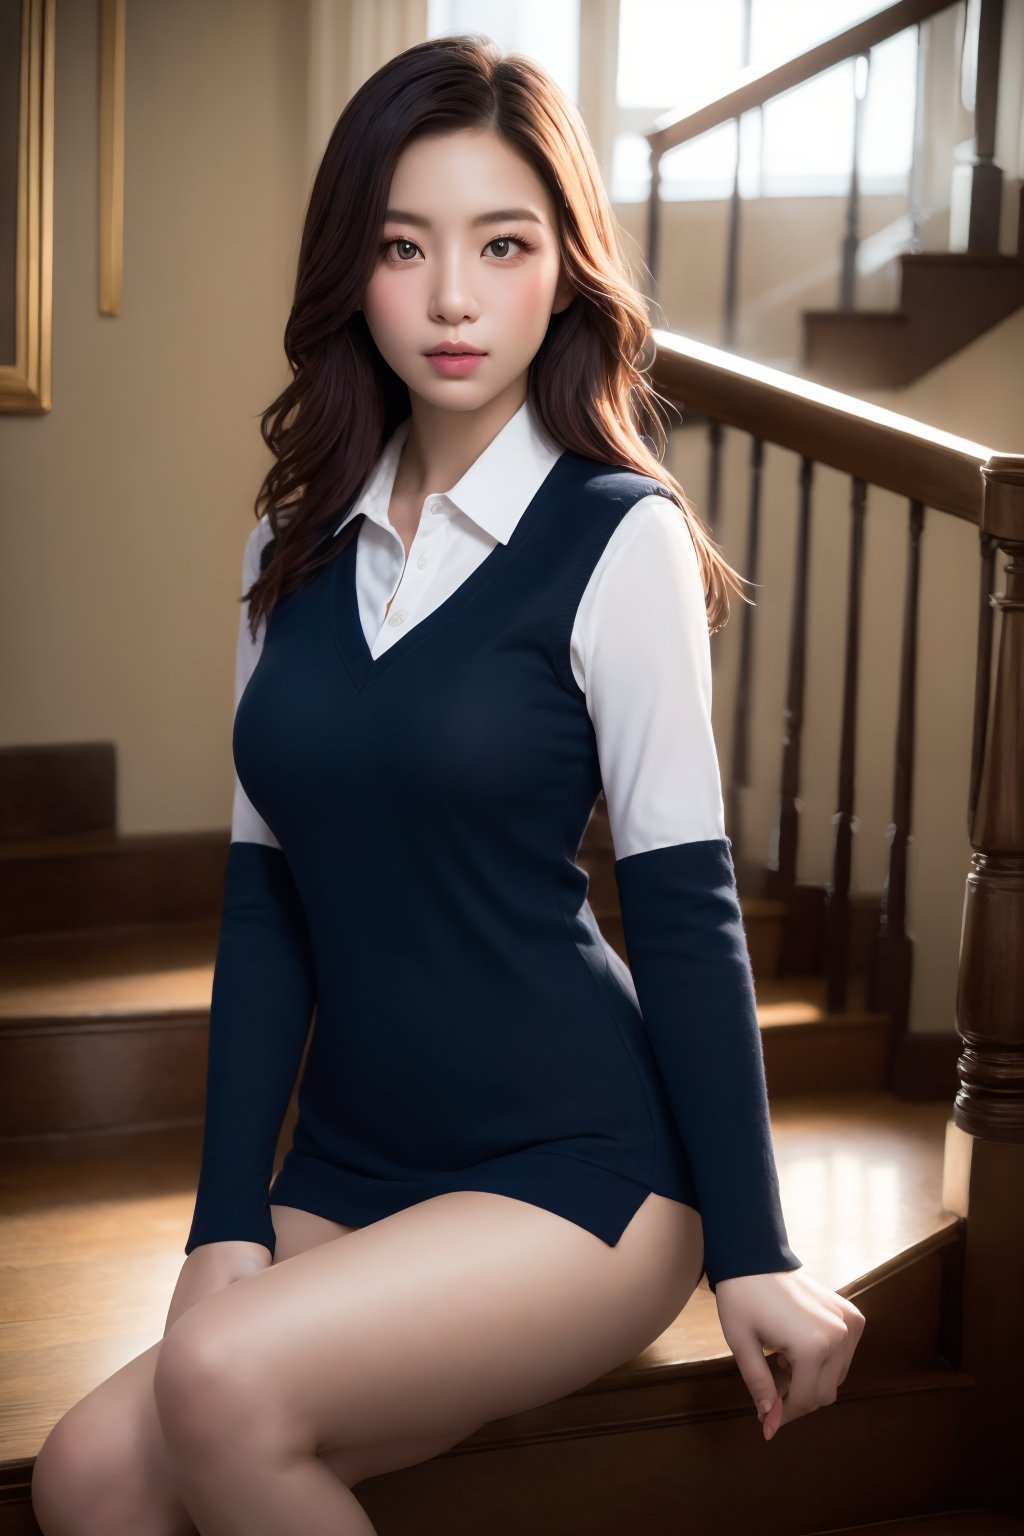 Here's a prompt that meets your requirements:

A photorealistic image of a high school girl sitting on the stair, dressed in her crisp school uniform. The scene is captured in ultra-detailed, finely detailed, and high-resolution quality, with a perfect dynamic composition that draws the viewer's eye. Her beautiful, detailed eyes are sharp in focus, and the cowboy-shot framing captures the subject perfectly. Soft, split lighting highlights her features, creating a warm and inviting atmosphere.